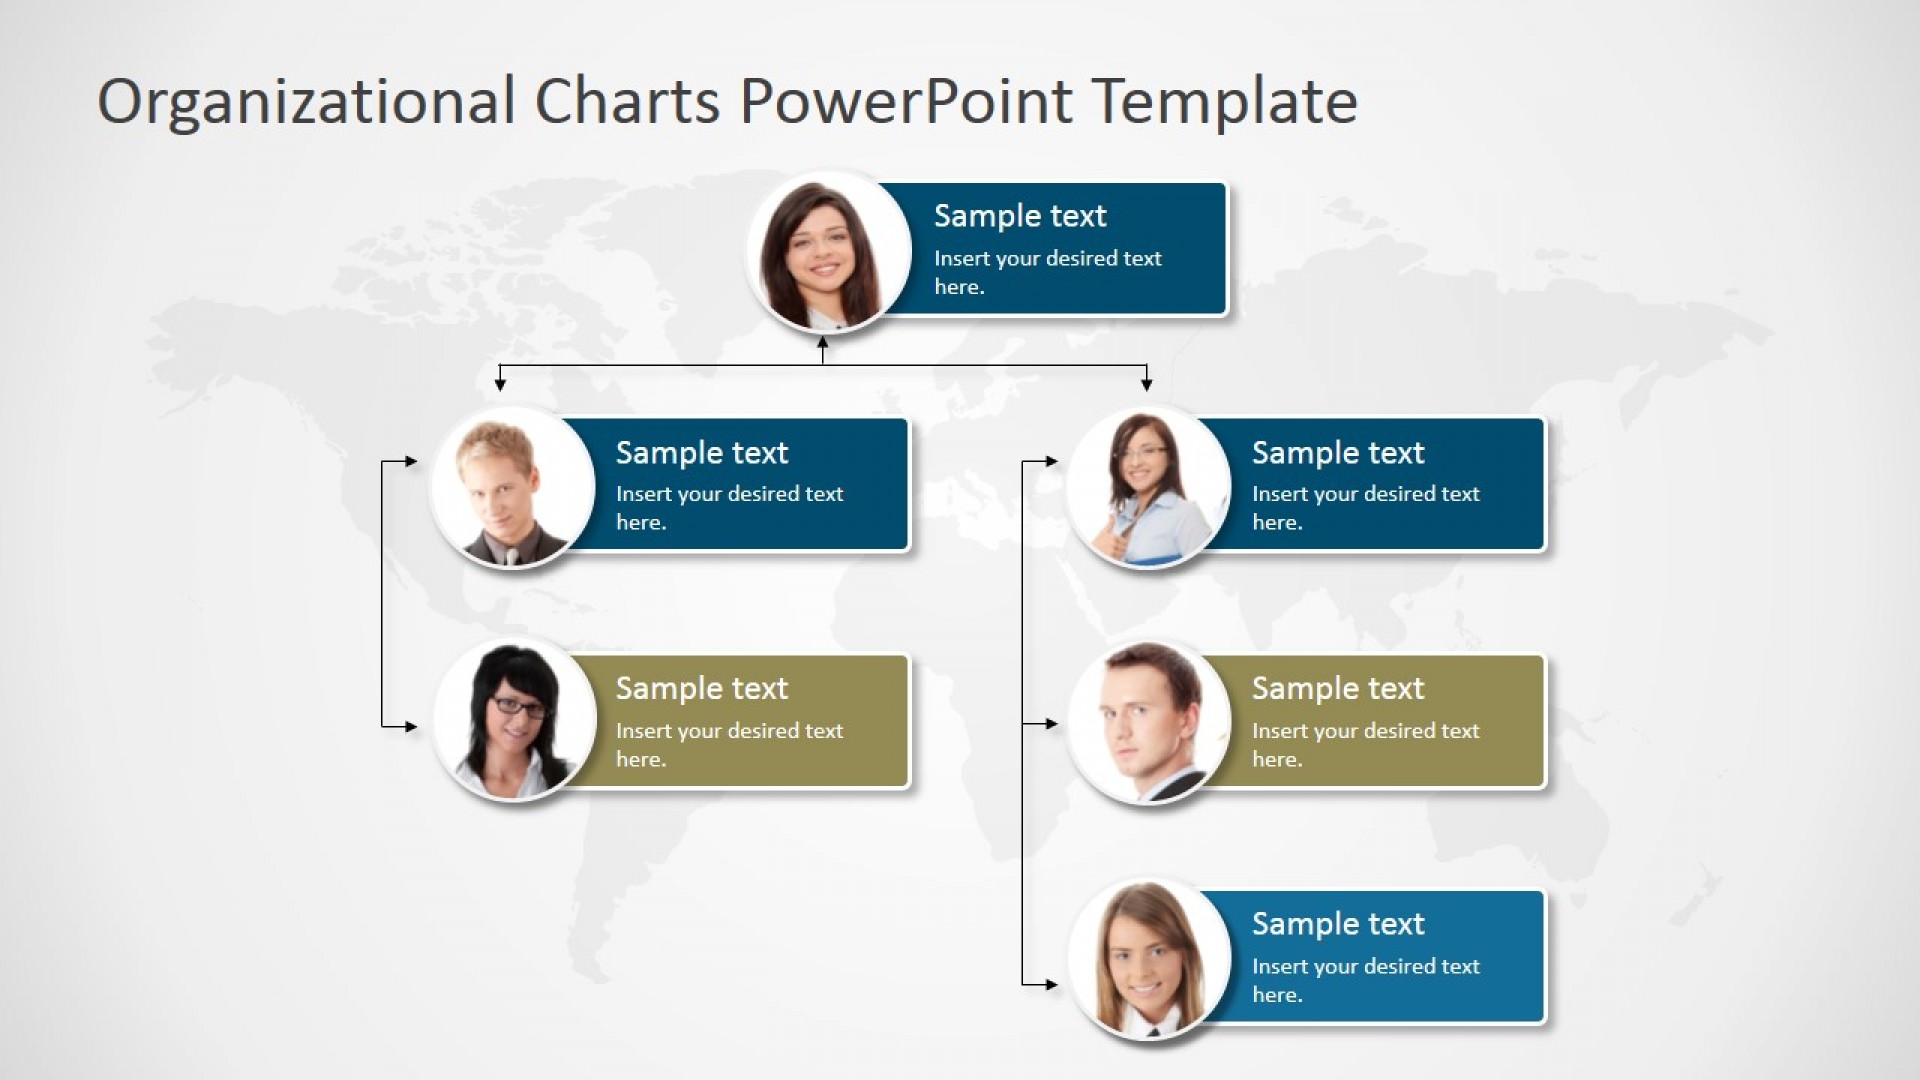 Templates for Excel Templates Organizational Chart Free Download intended for Excel Templates Organizational Chart Free Download Template